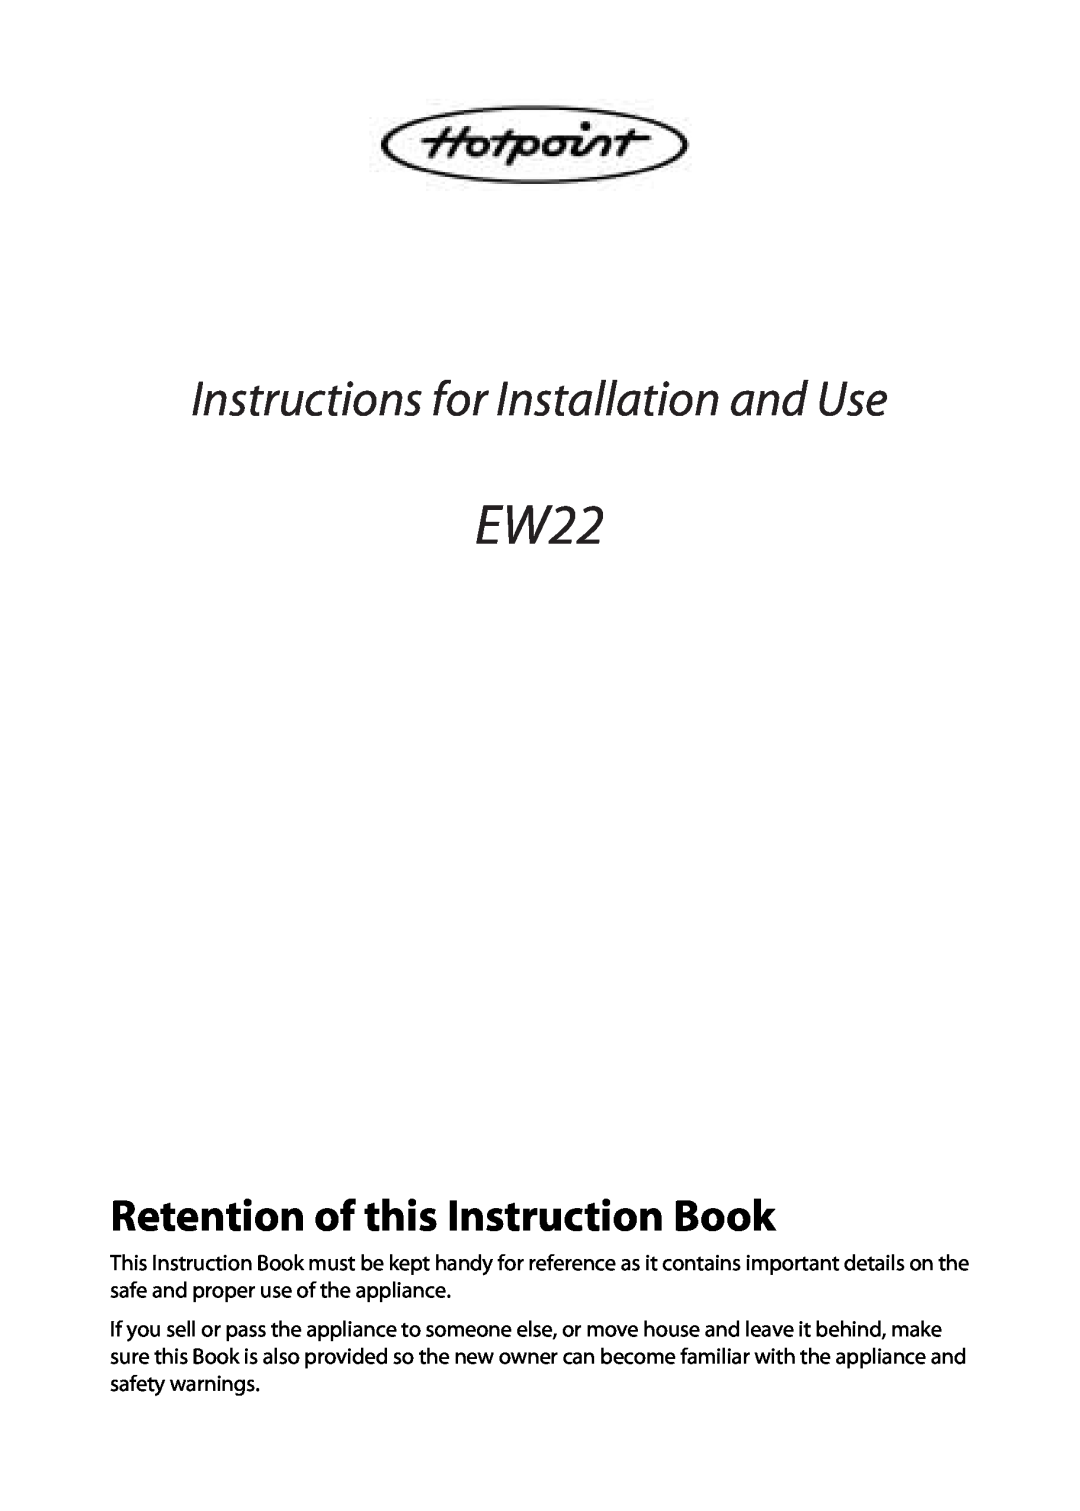 Hotpoint EW22 manual Retention of this Instruction Book, Instructions for Installation and Use 